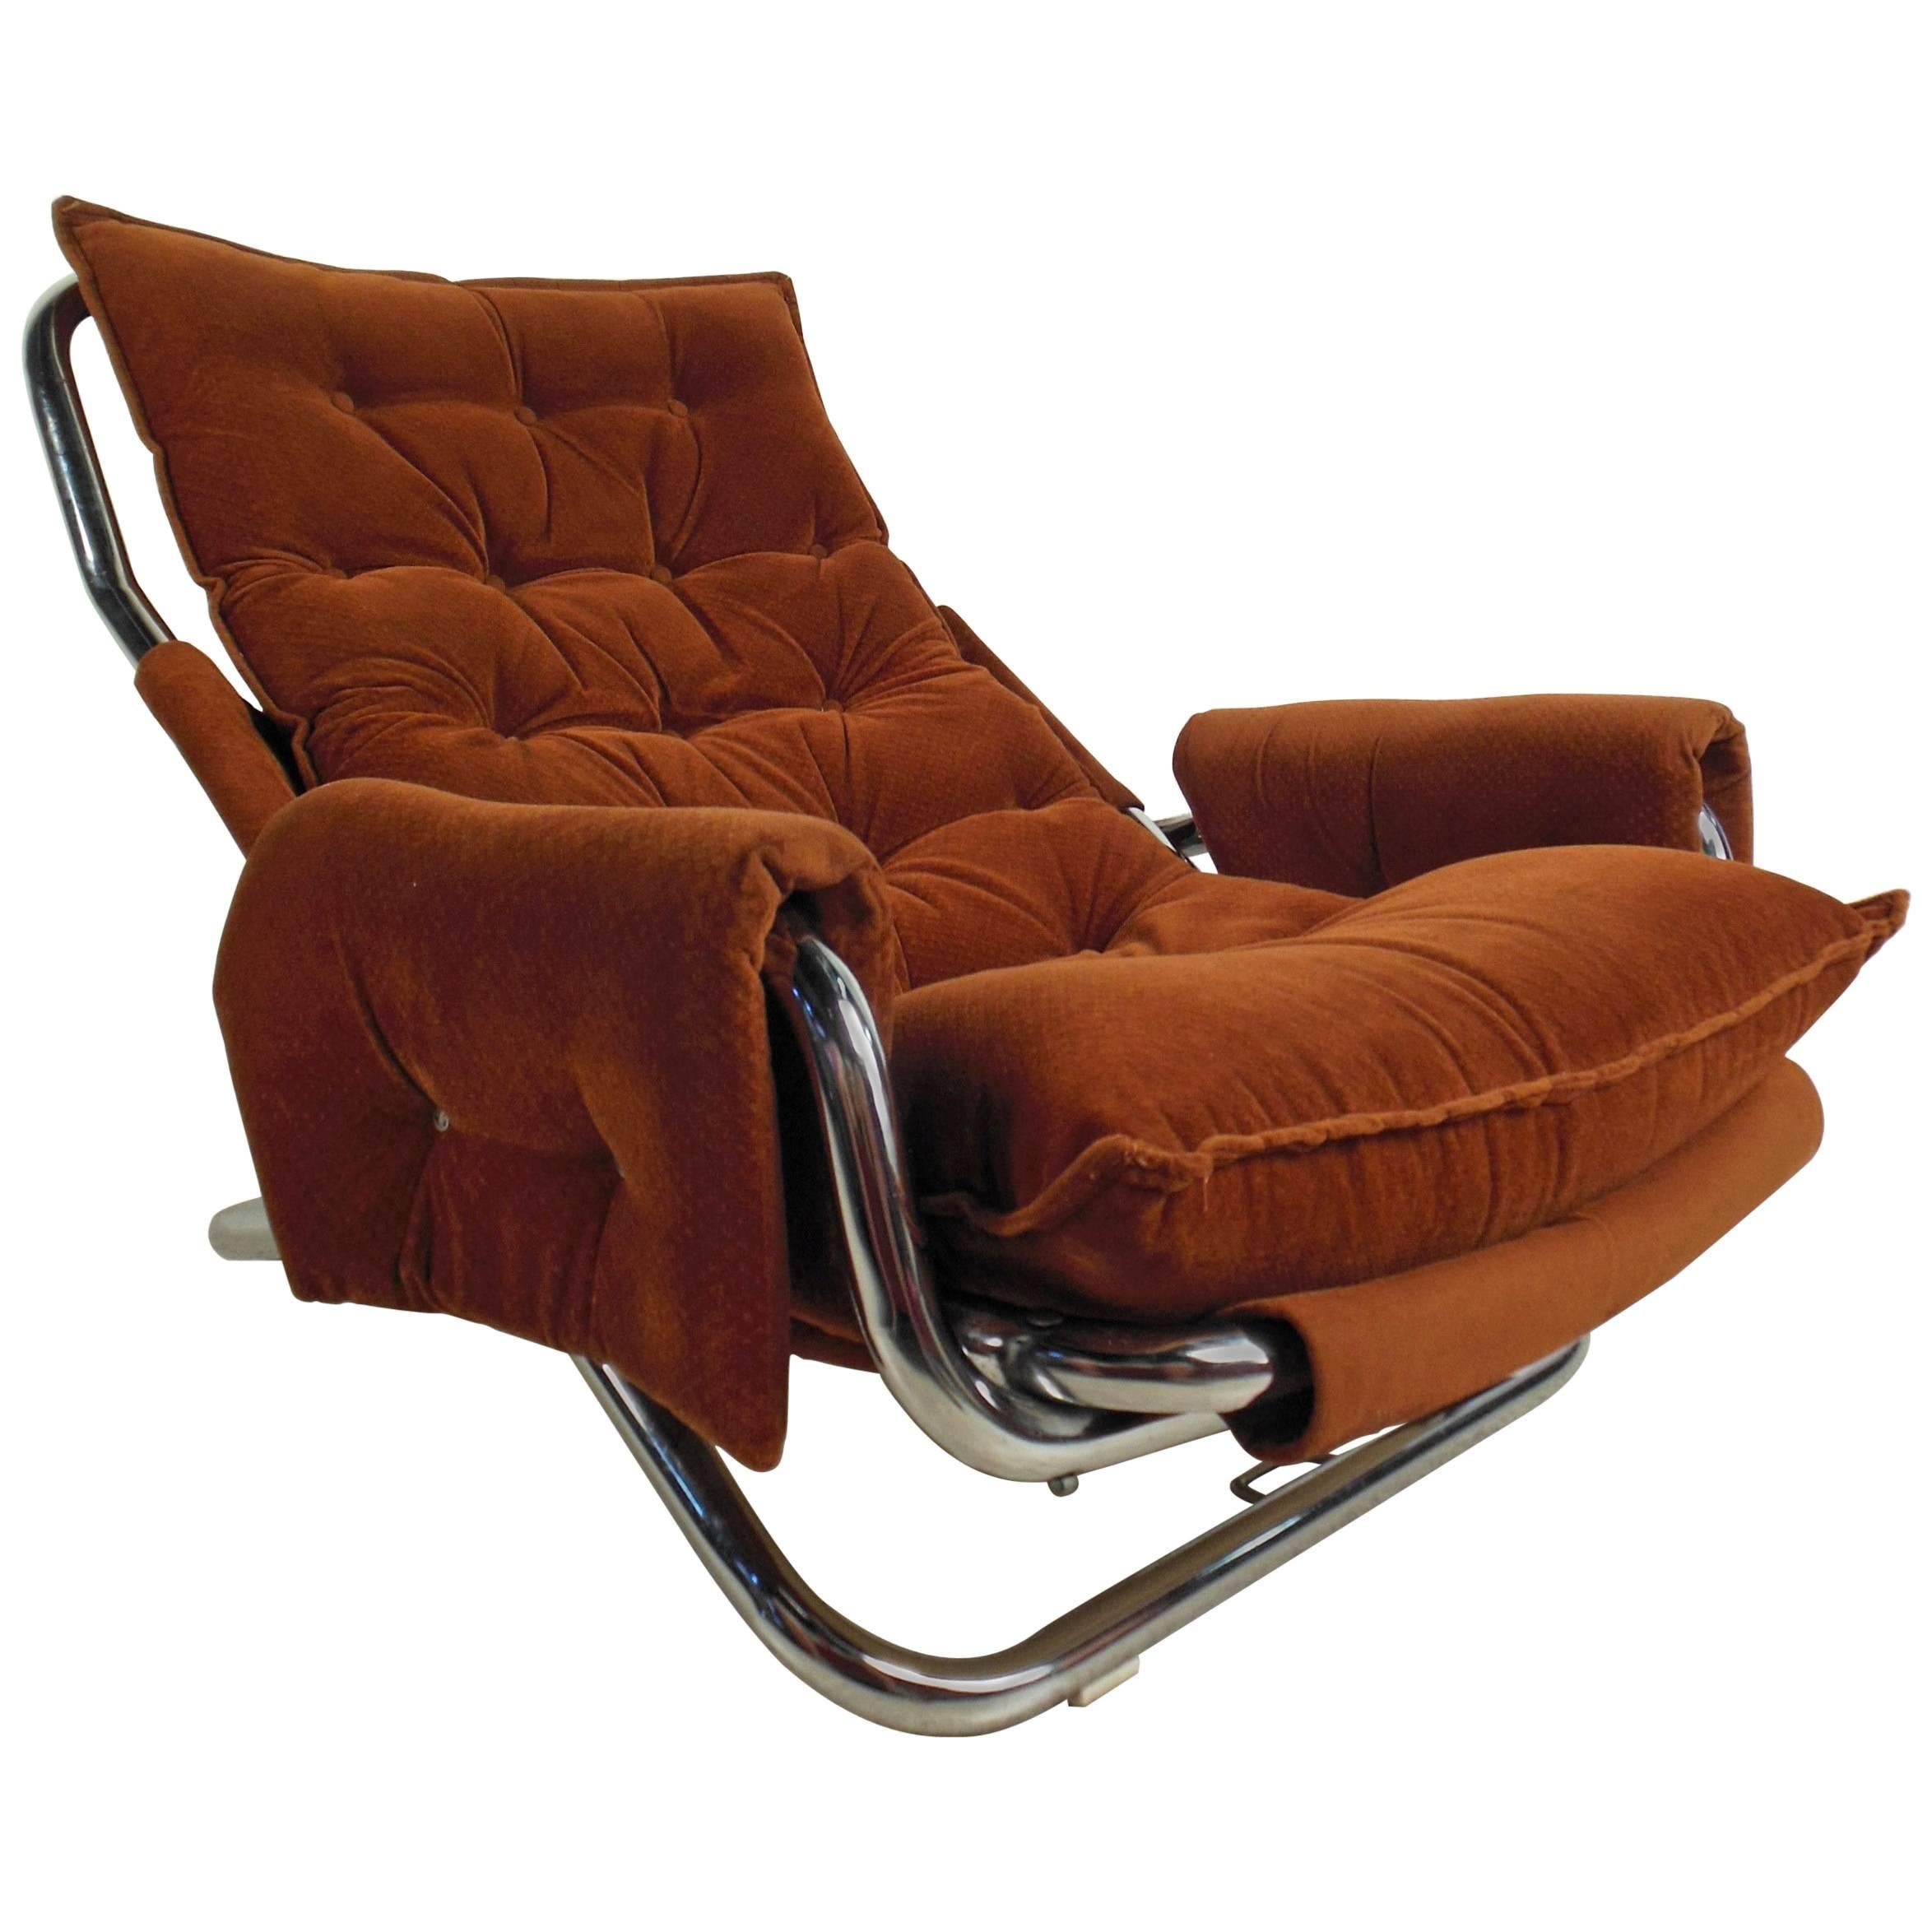 Vintage Modern Sling Style Lounge Chair